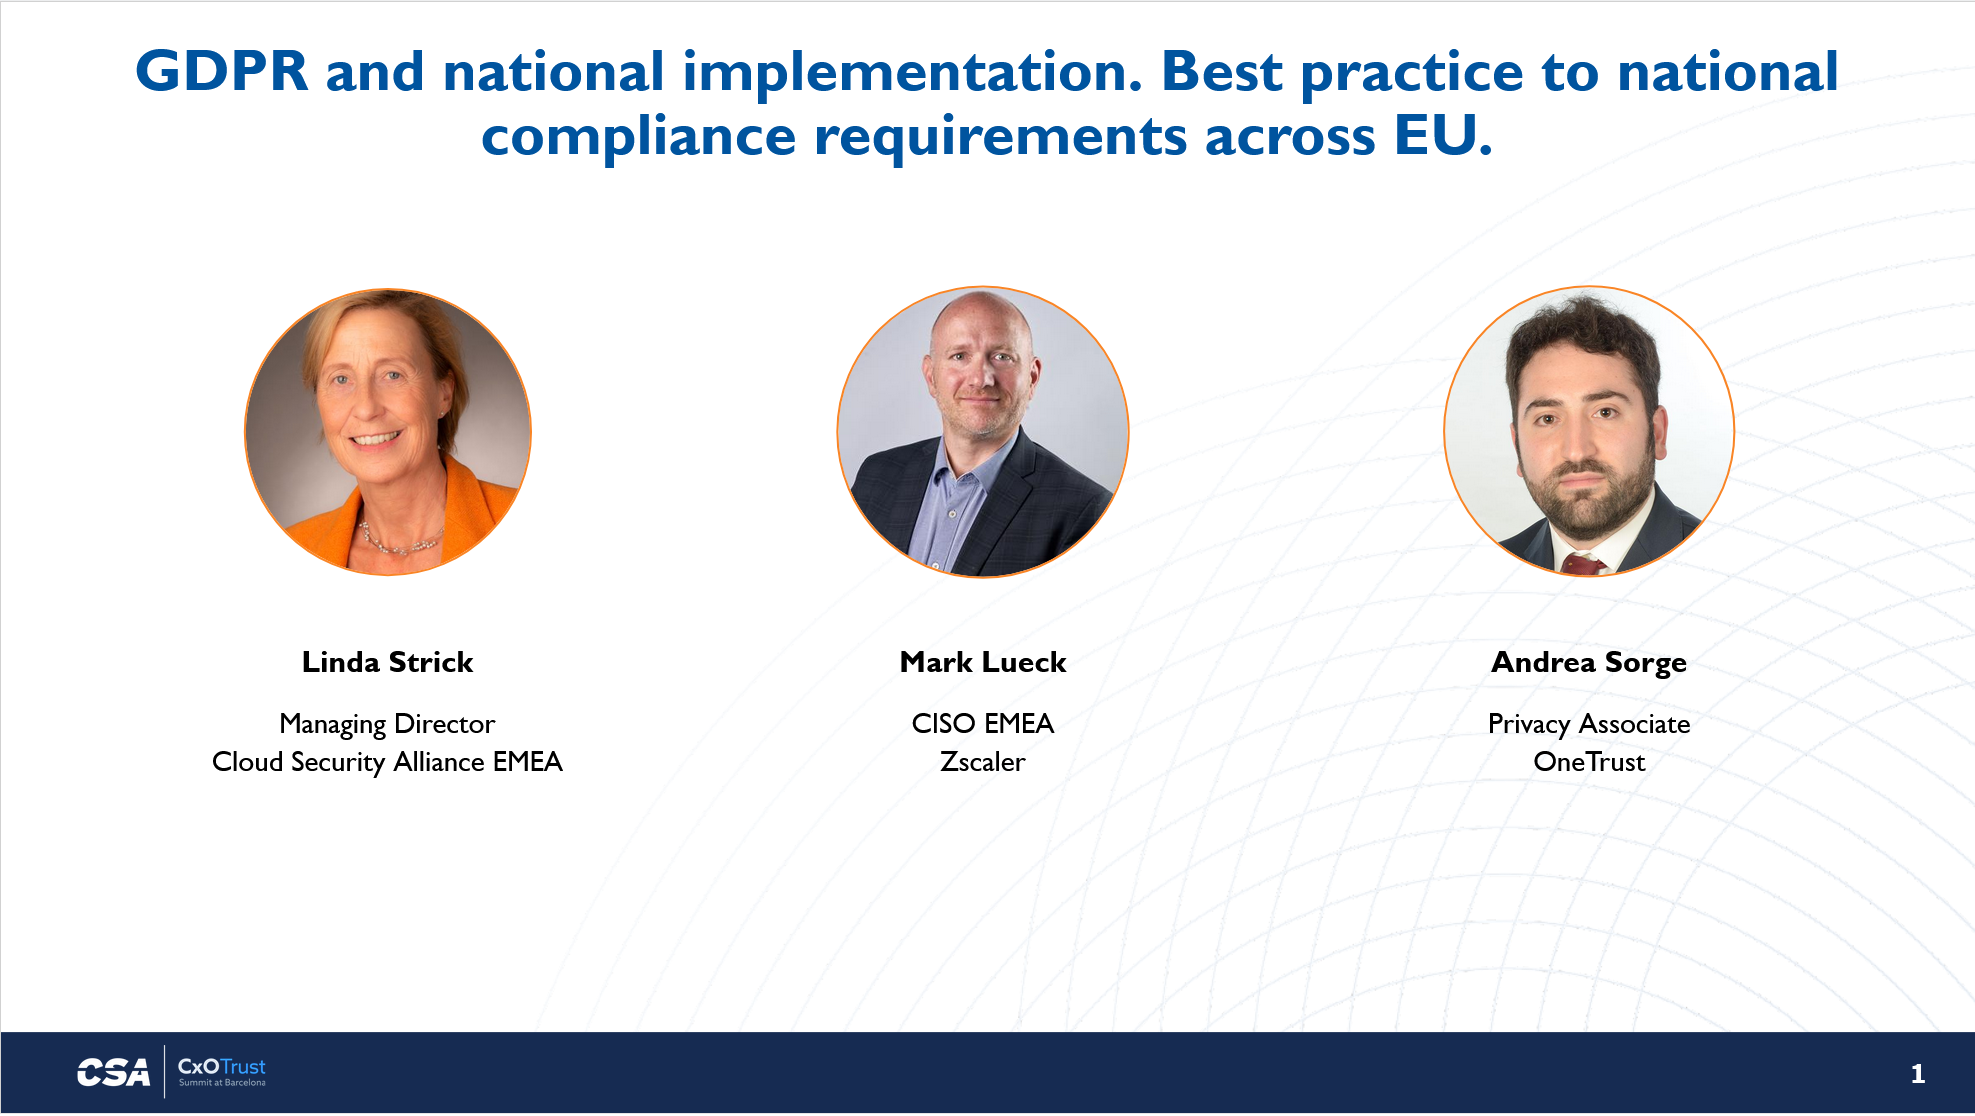 GDPR and national implementation. Best practice to national compliance requirements across EU.